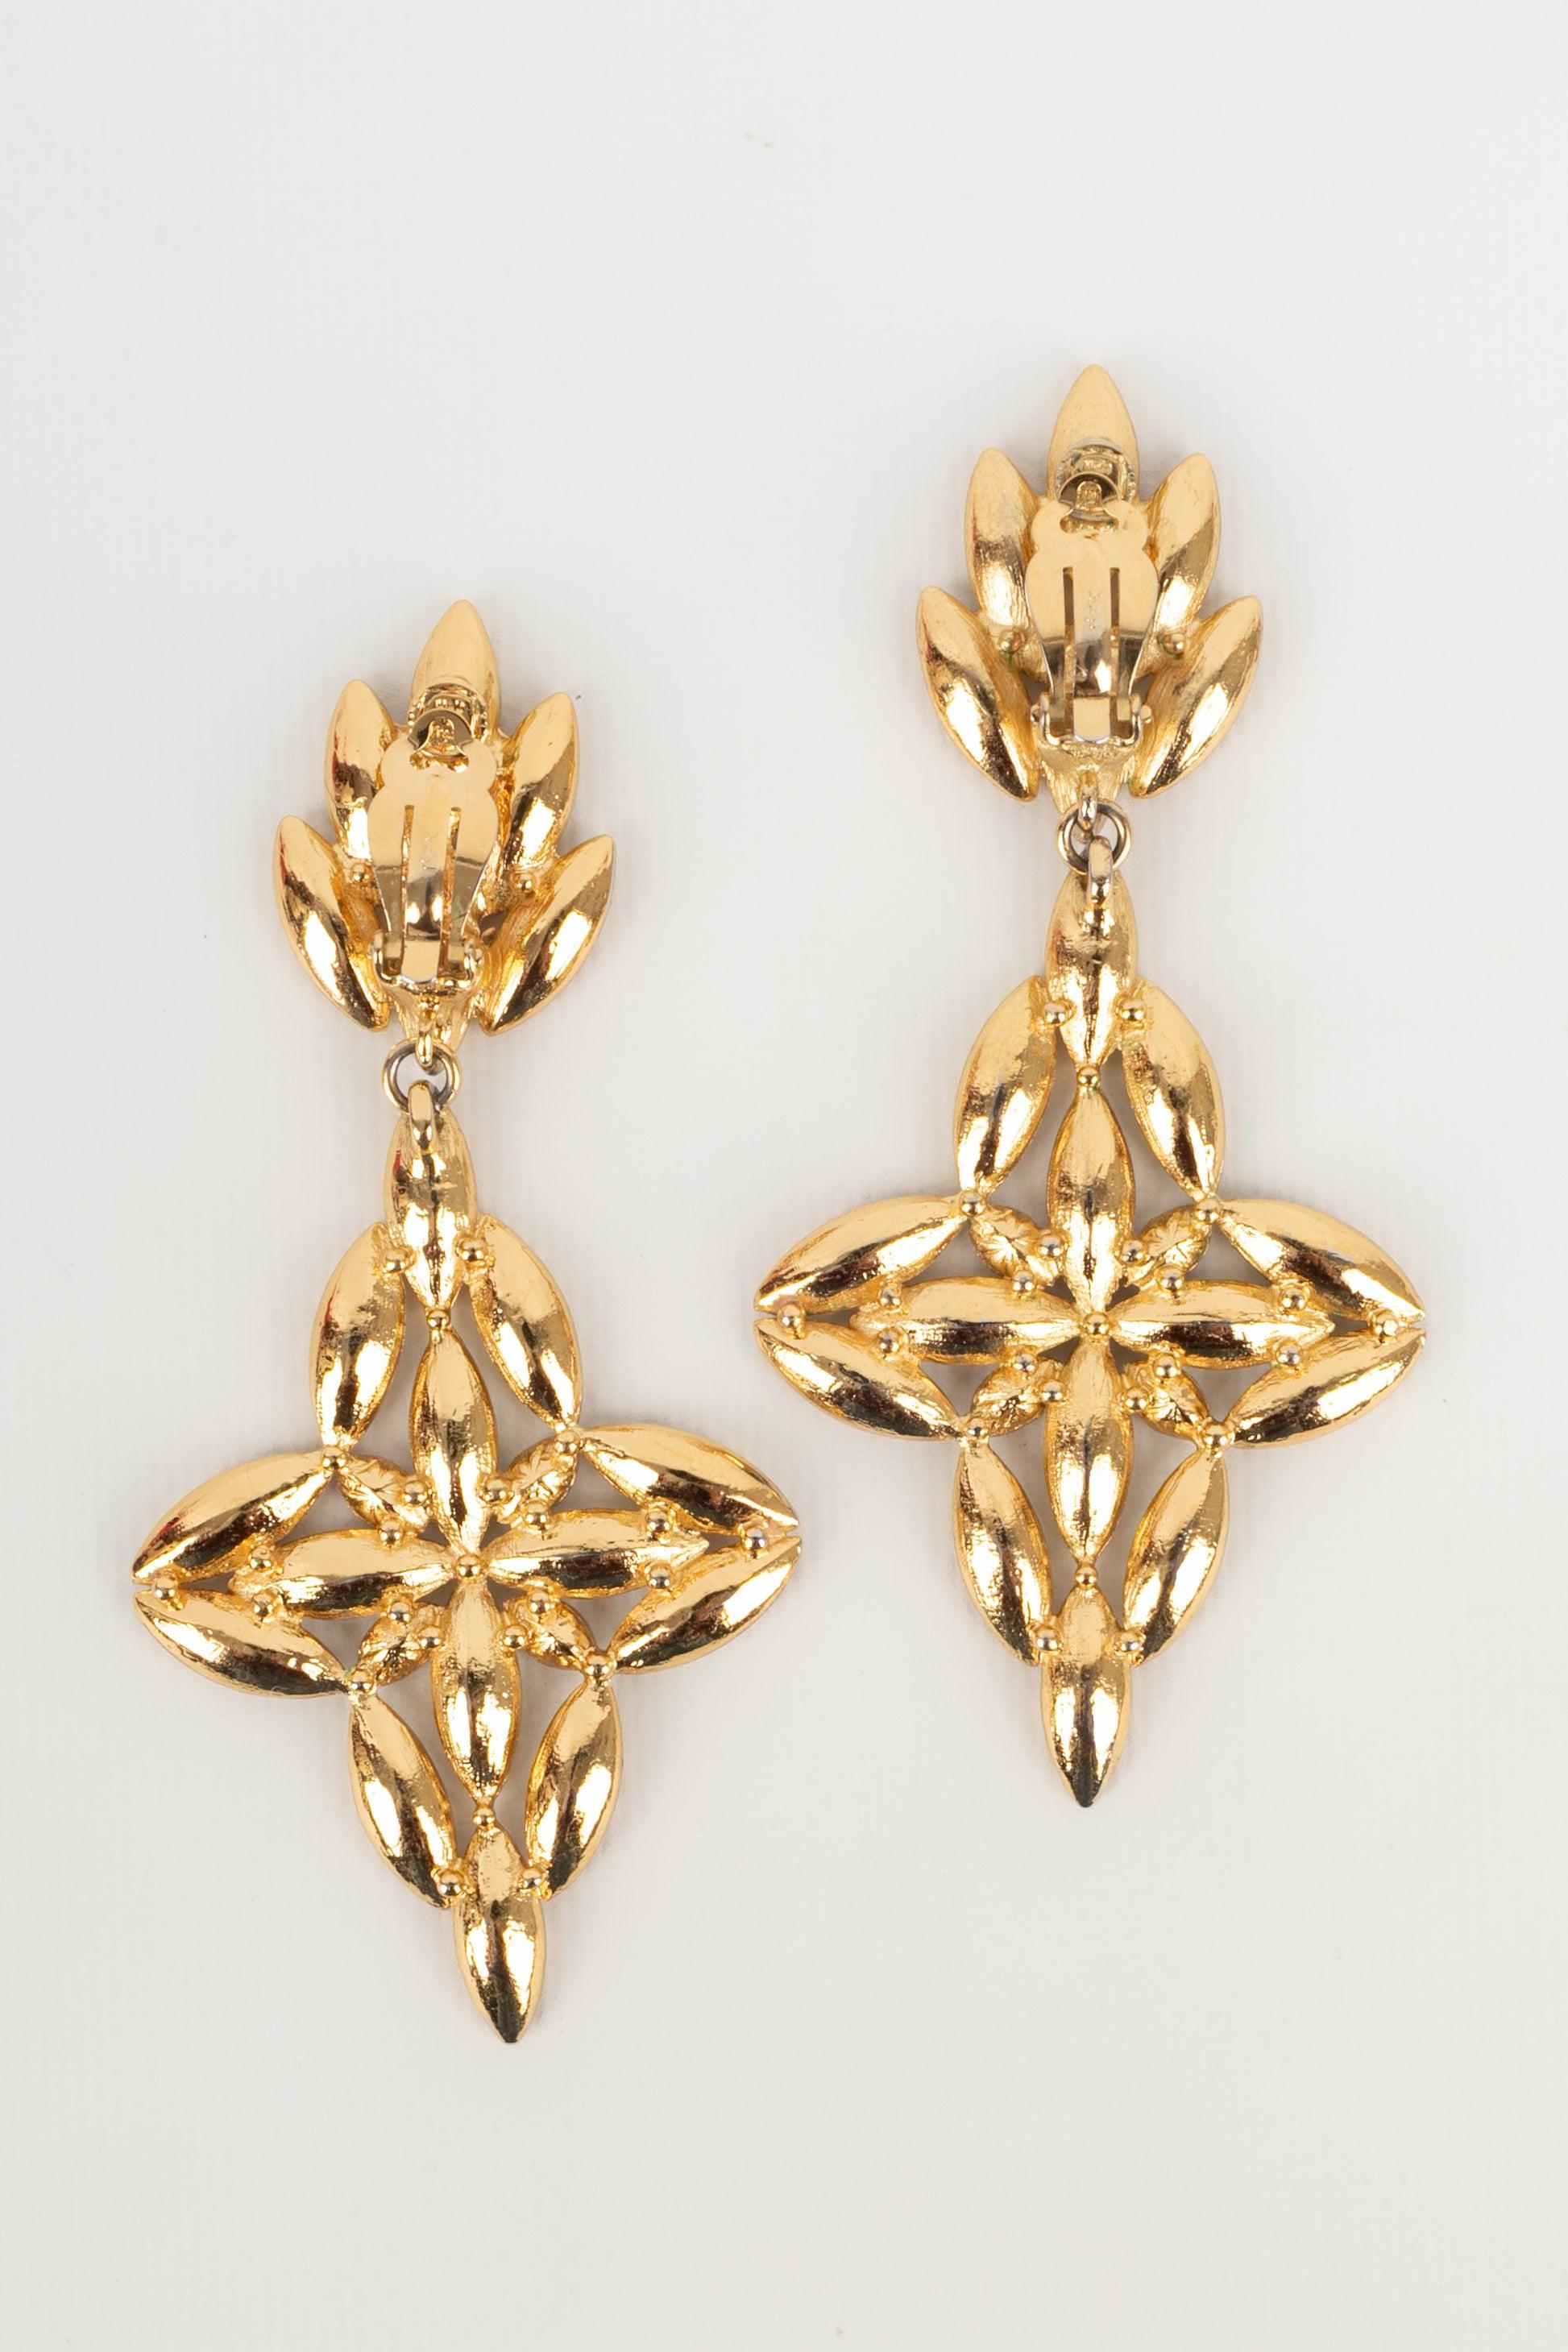 Yves Saint Laurent Golden Metal Earrings with Rhinestones In Excellent Condition For Sale In SAINT-OUEN-SUR-SEINE, FR